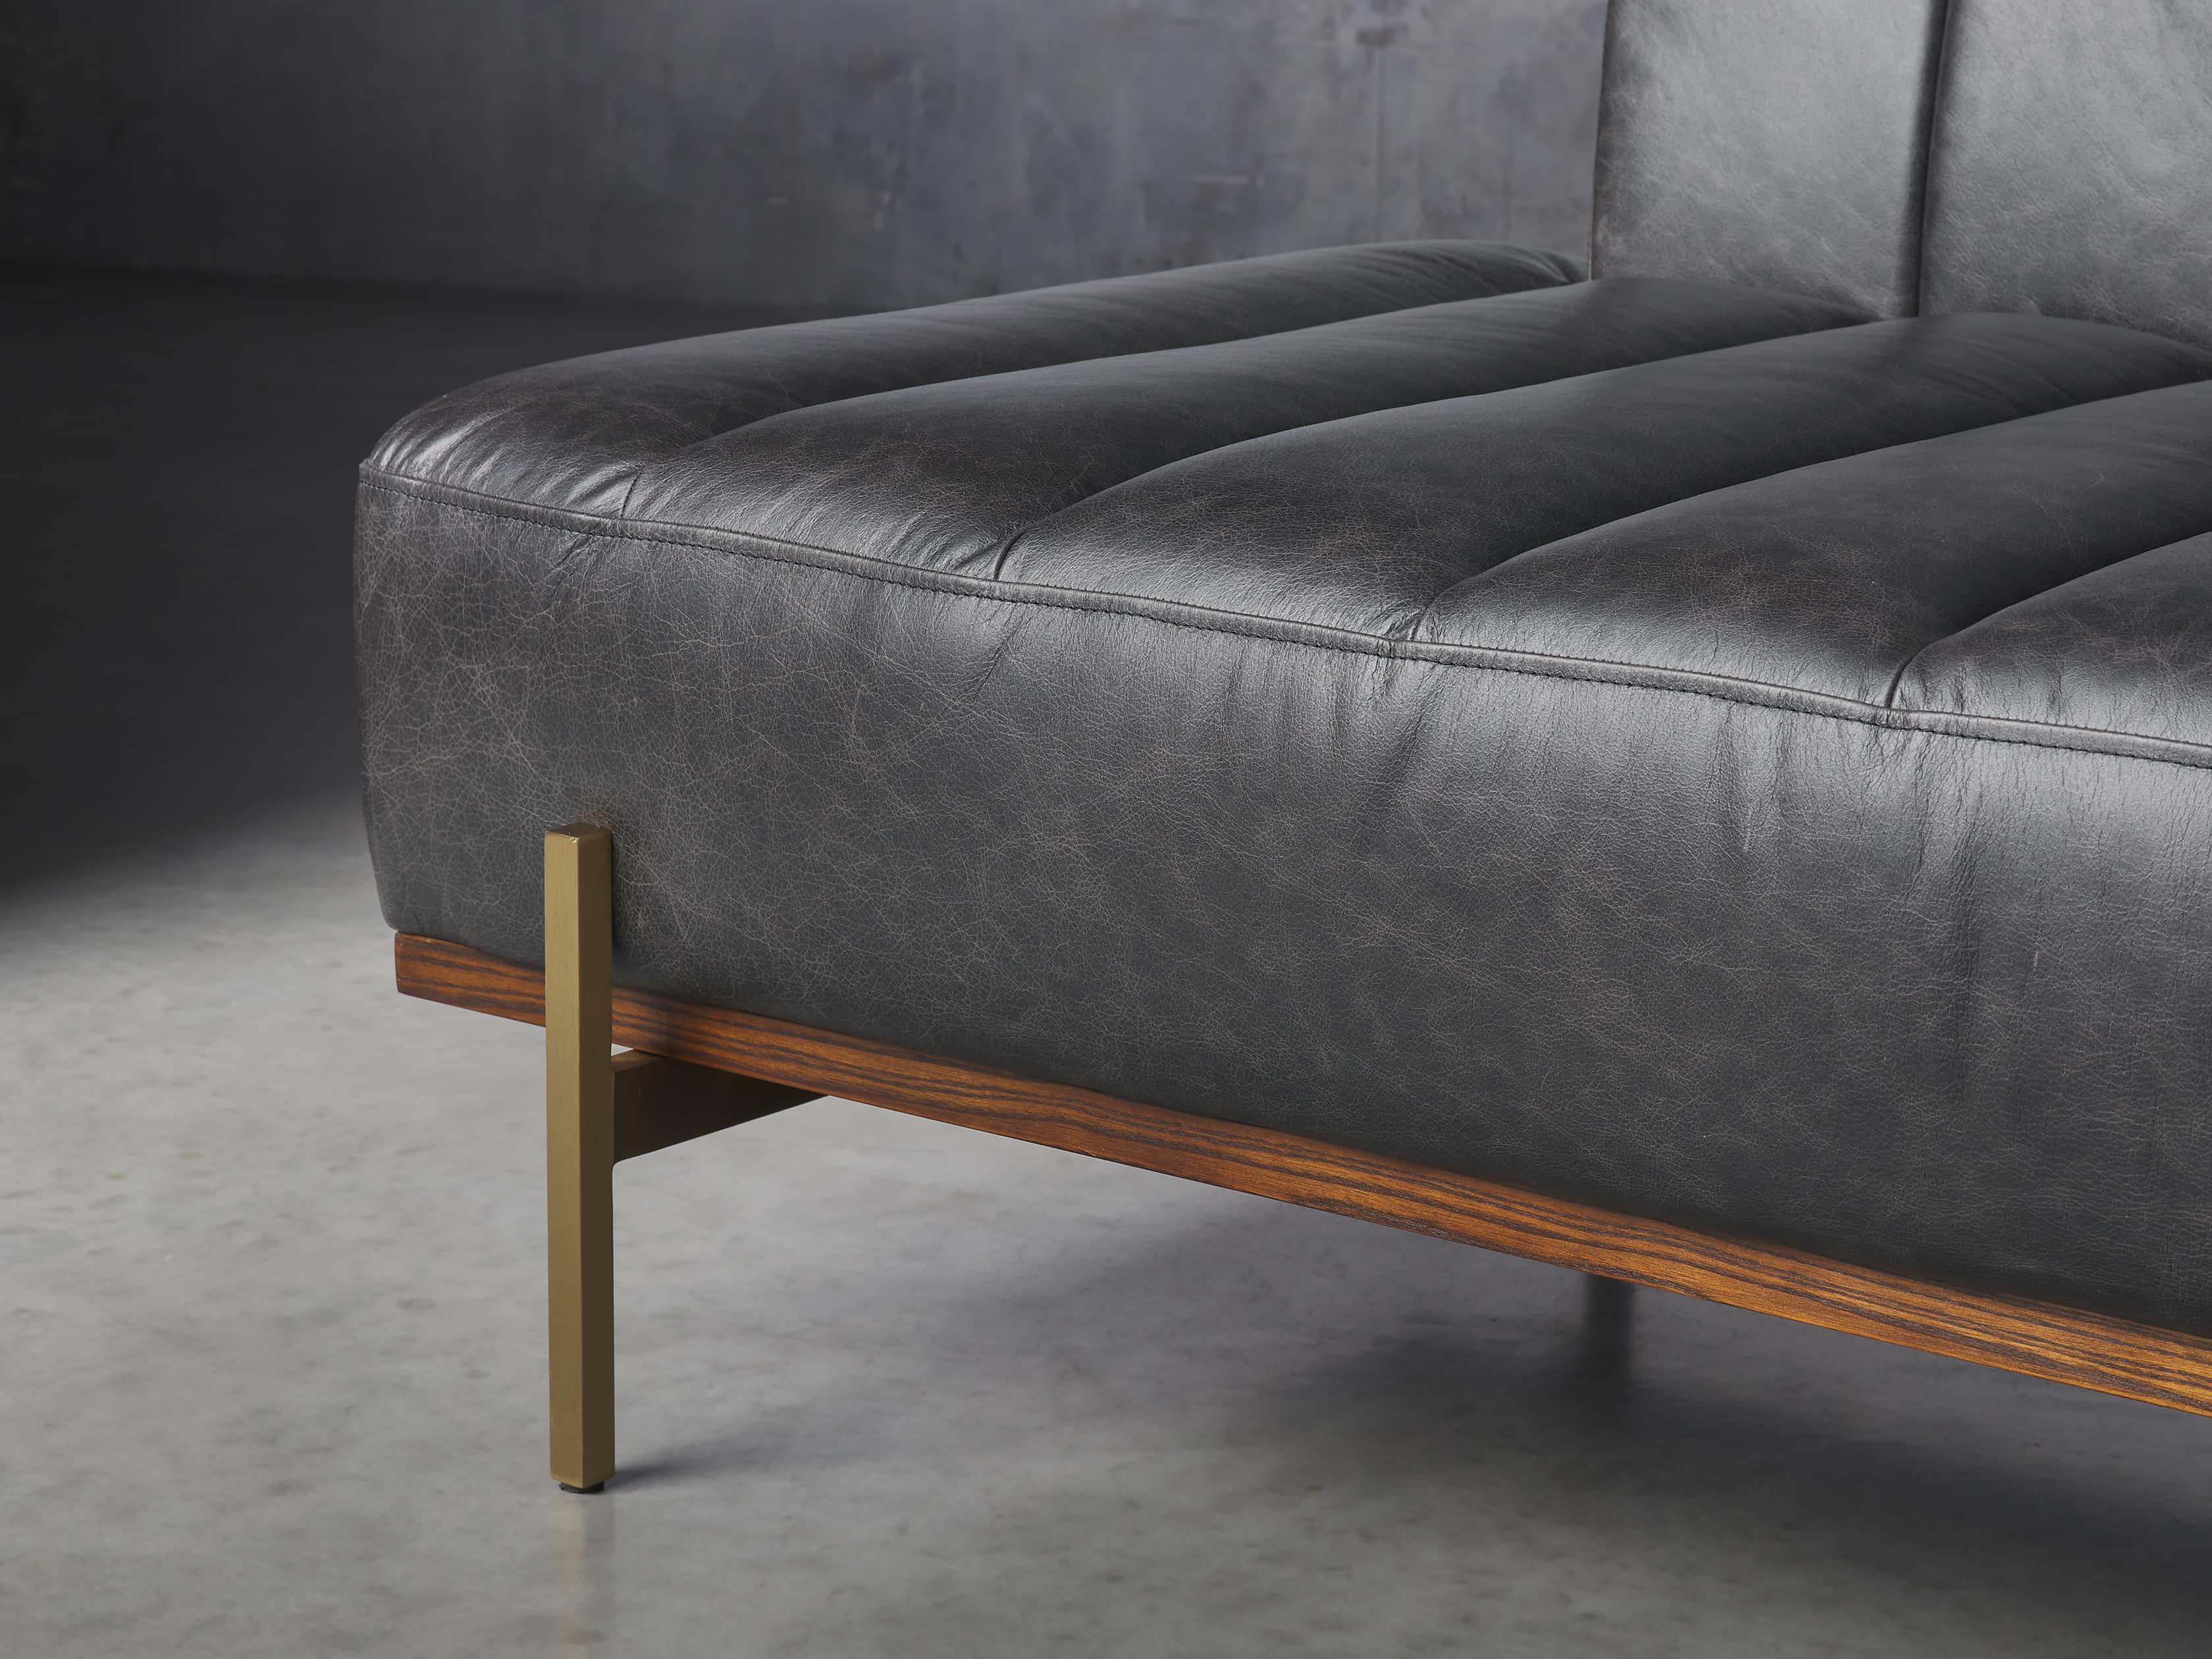 Lansing Leather Daybed Arhaus, Daybed Leather